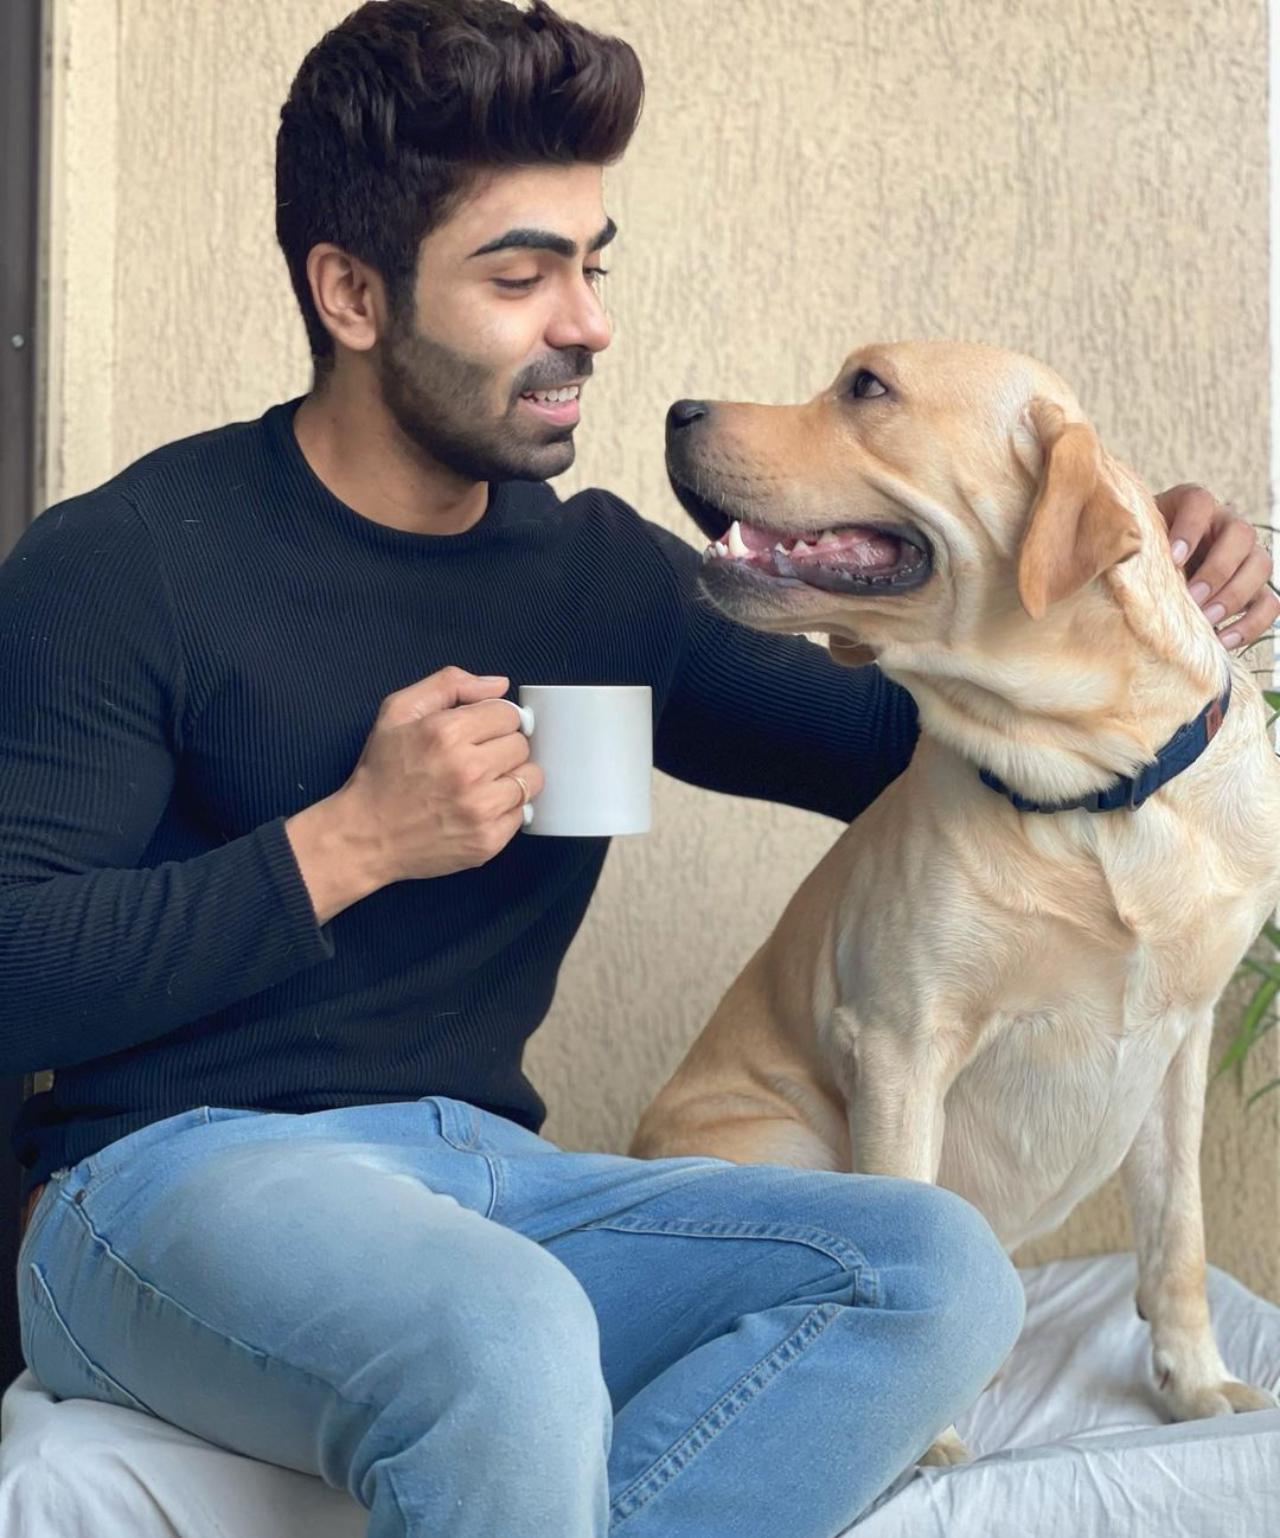 Akash Choudhary 
'Bhagya Lakshmi' actor Akash Choudhary is a true animal lover and an advocate for animal rights. His adorable doggo, Hazel, holds a special place in his heart and even has her own Instagram account, ‘Paws of Hazel’